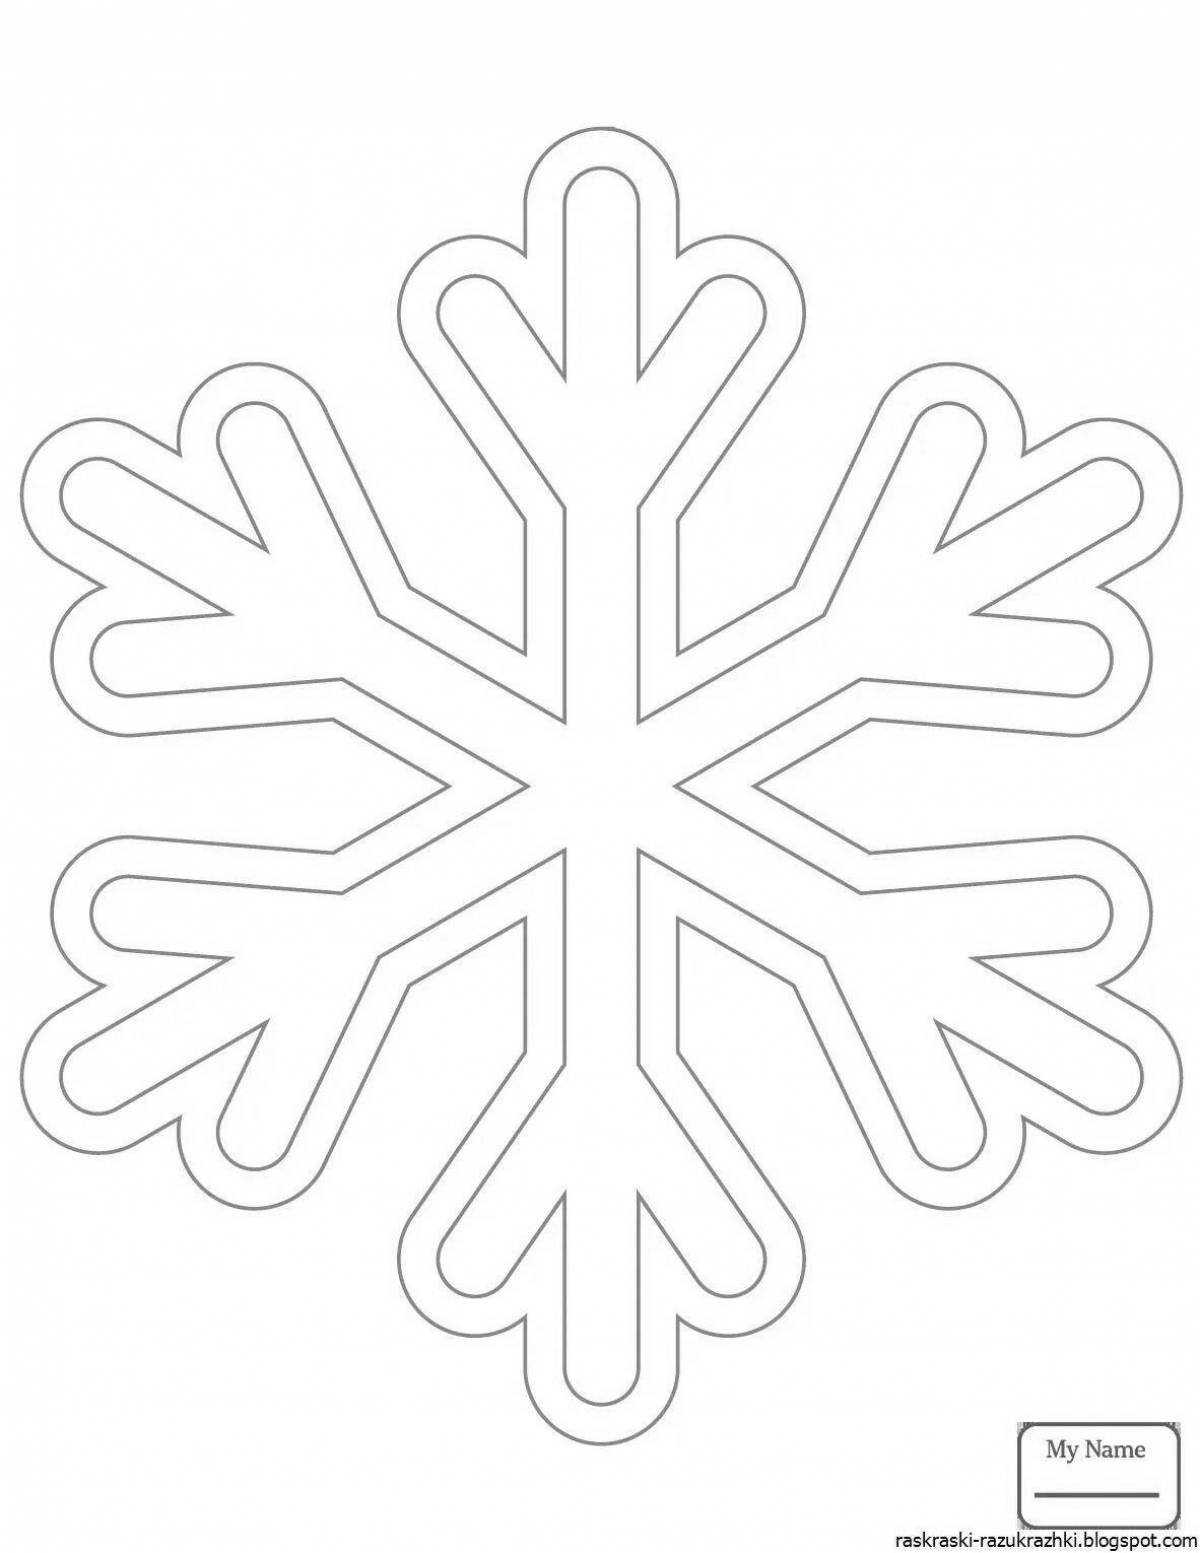 Awesome snowflake coloring page